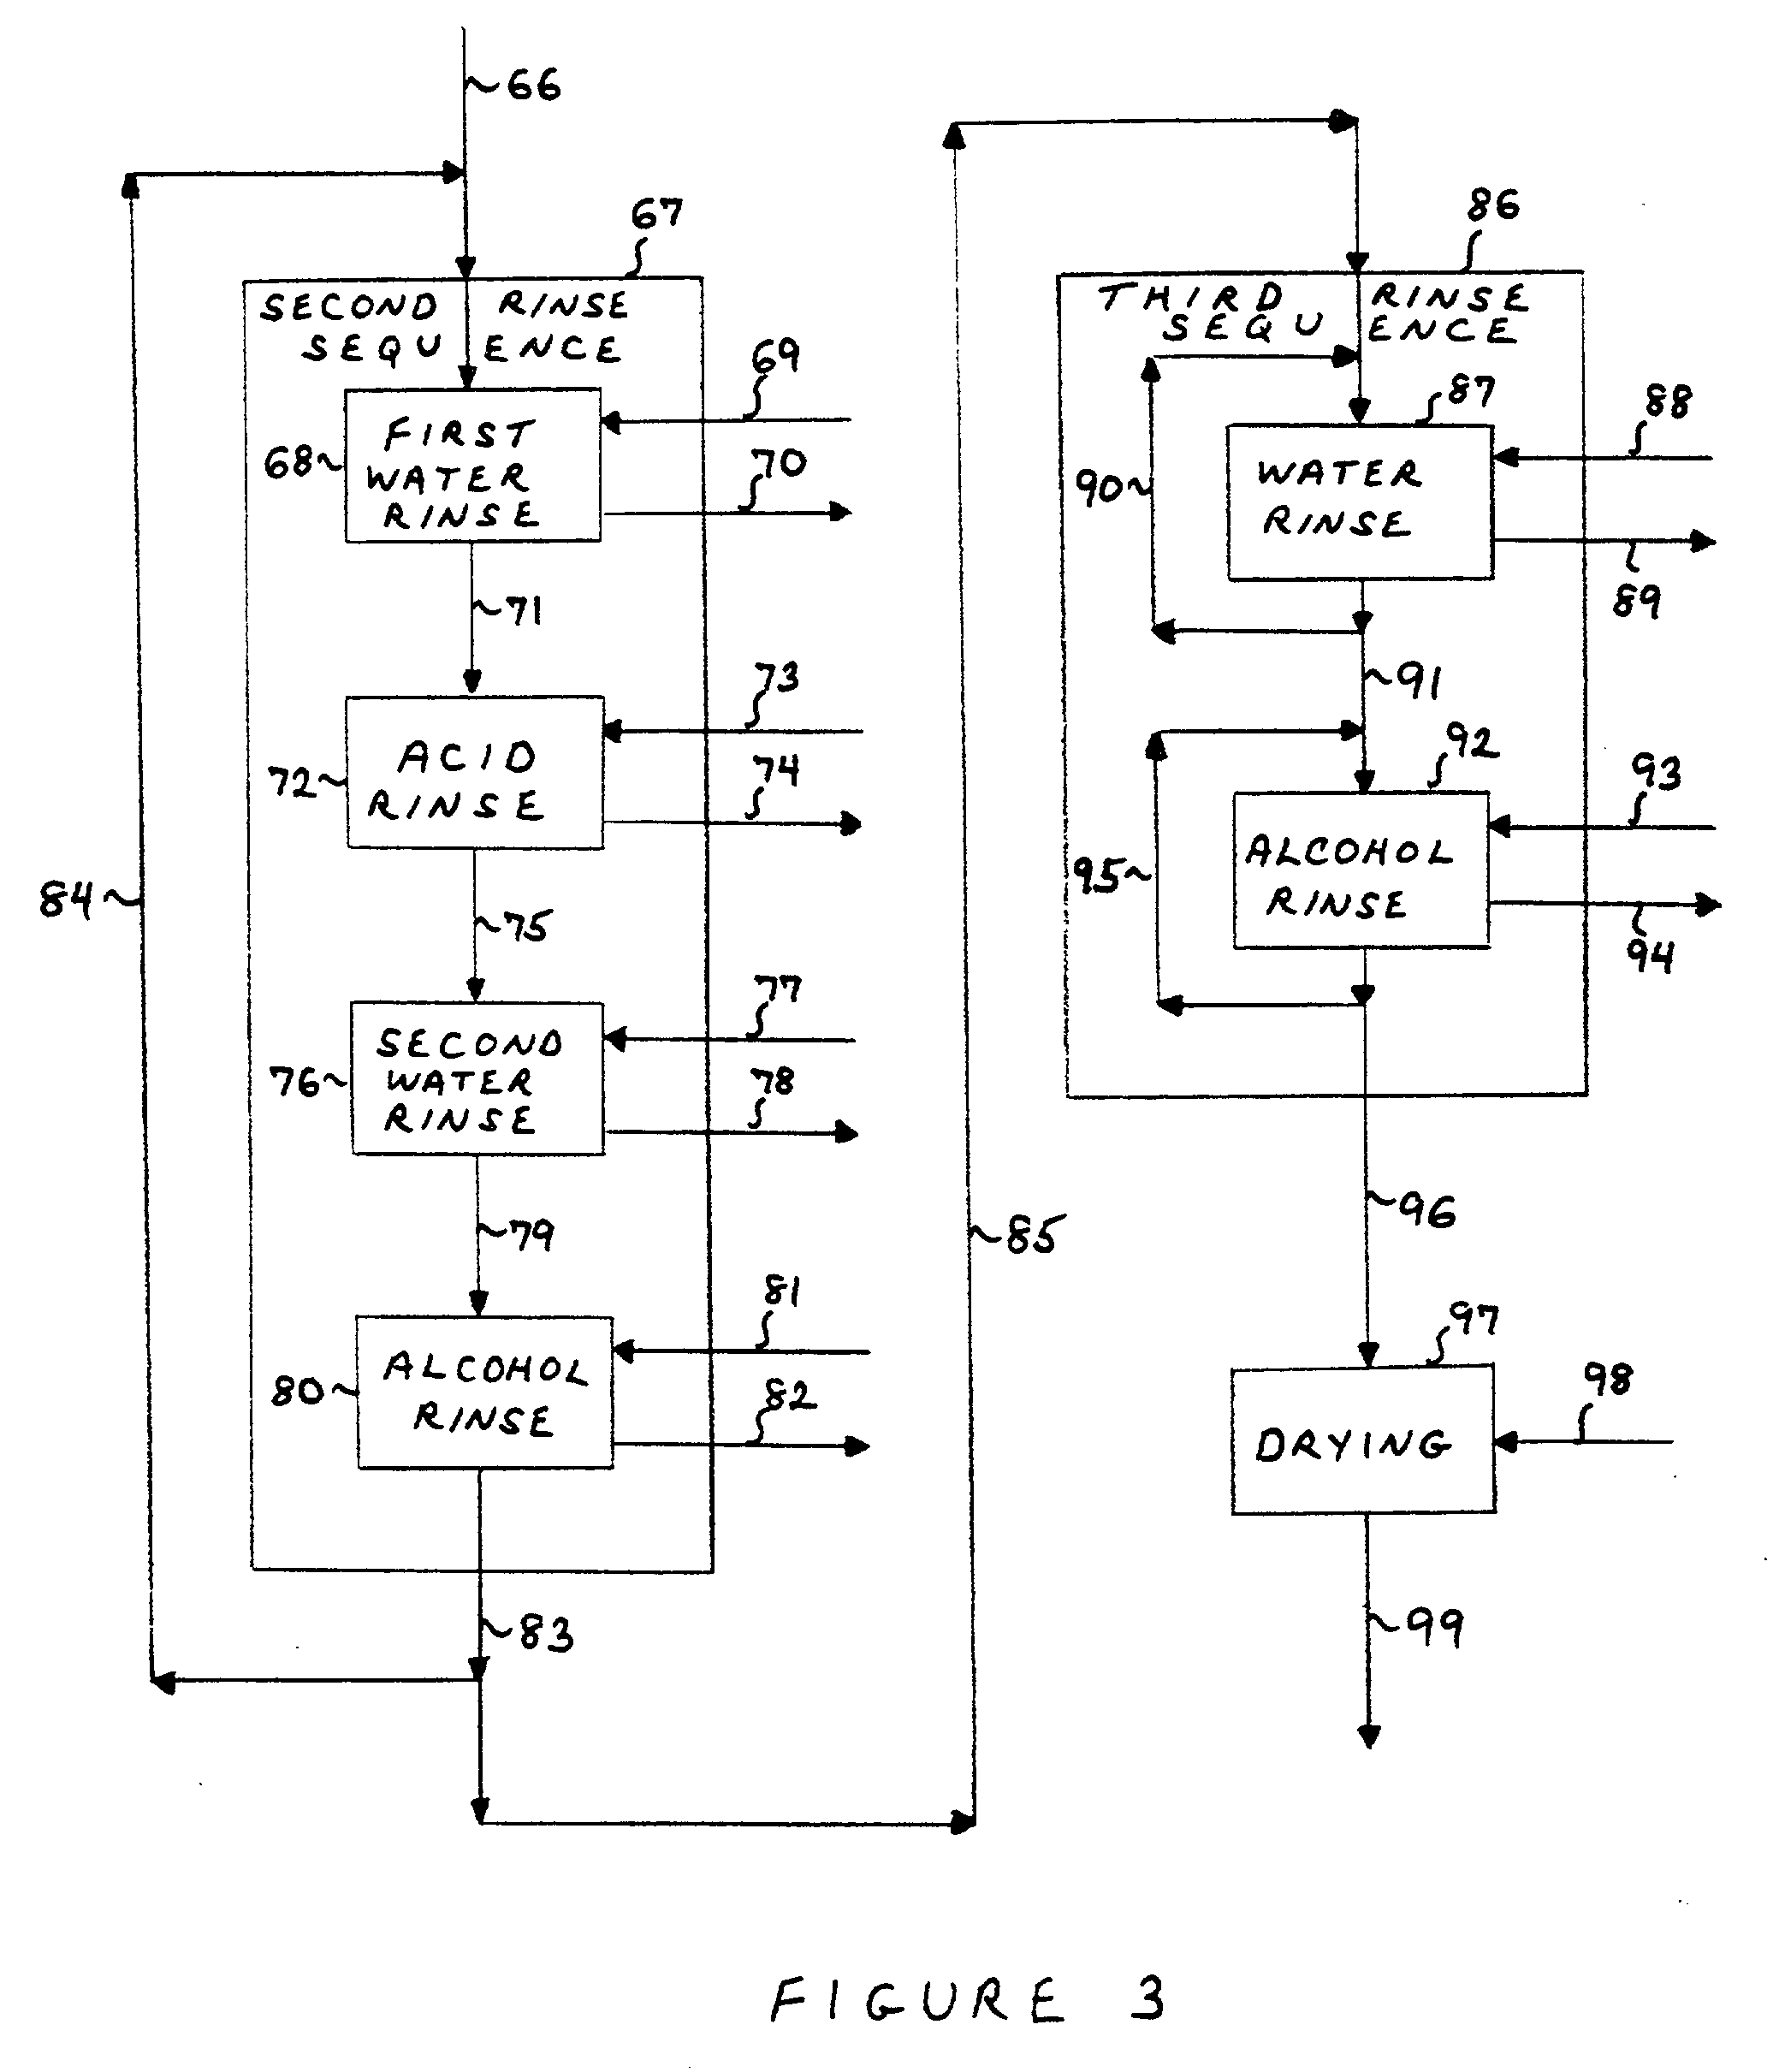 Process for the preparation of noble metal coated non-noble metal substrates, coated materials produced in accordance therewith and compositions utilizing the coated materials